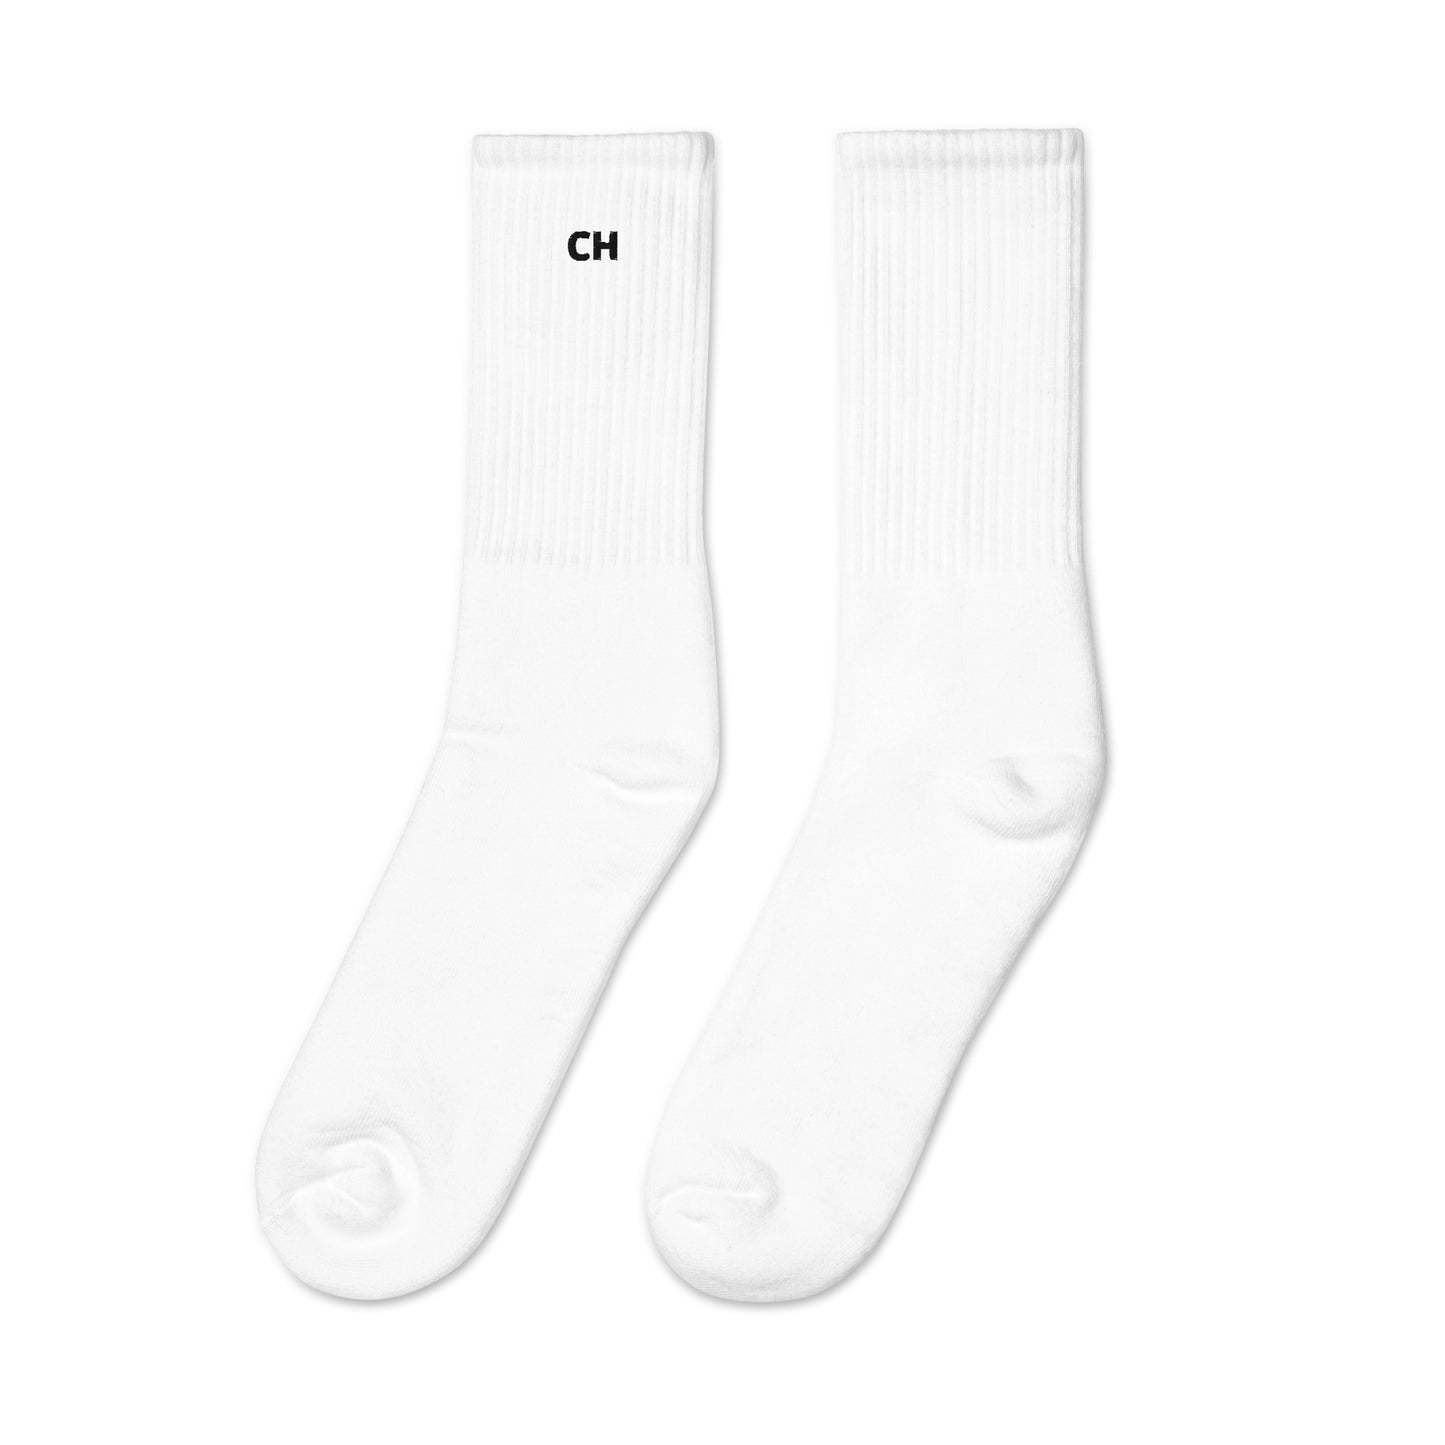 CH EMBROIDERED SOCKS